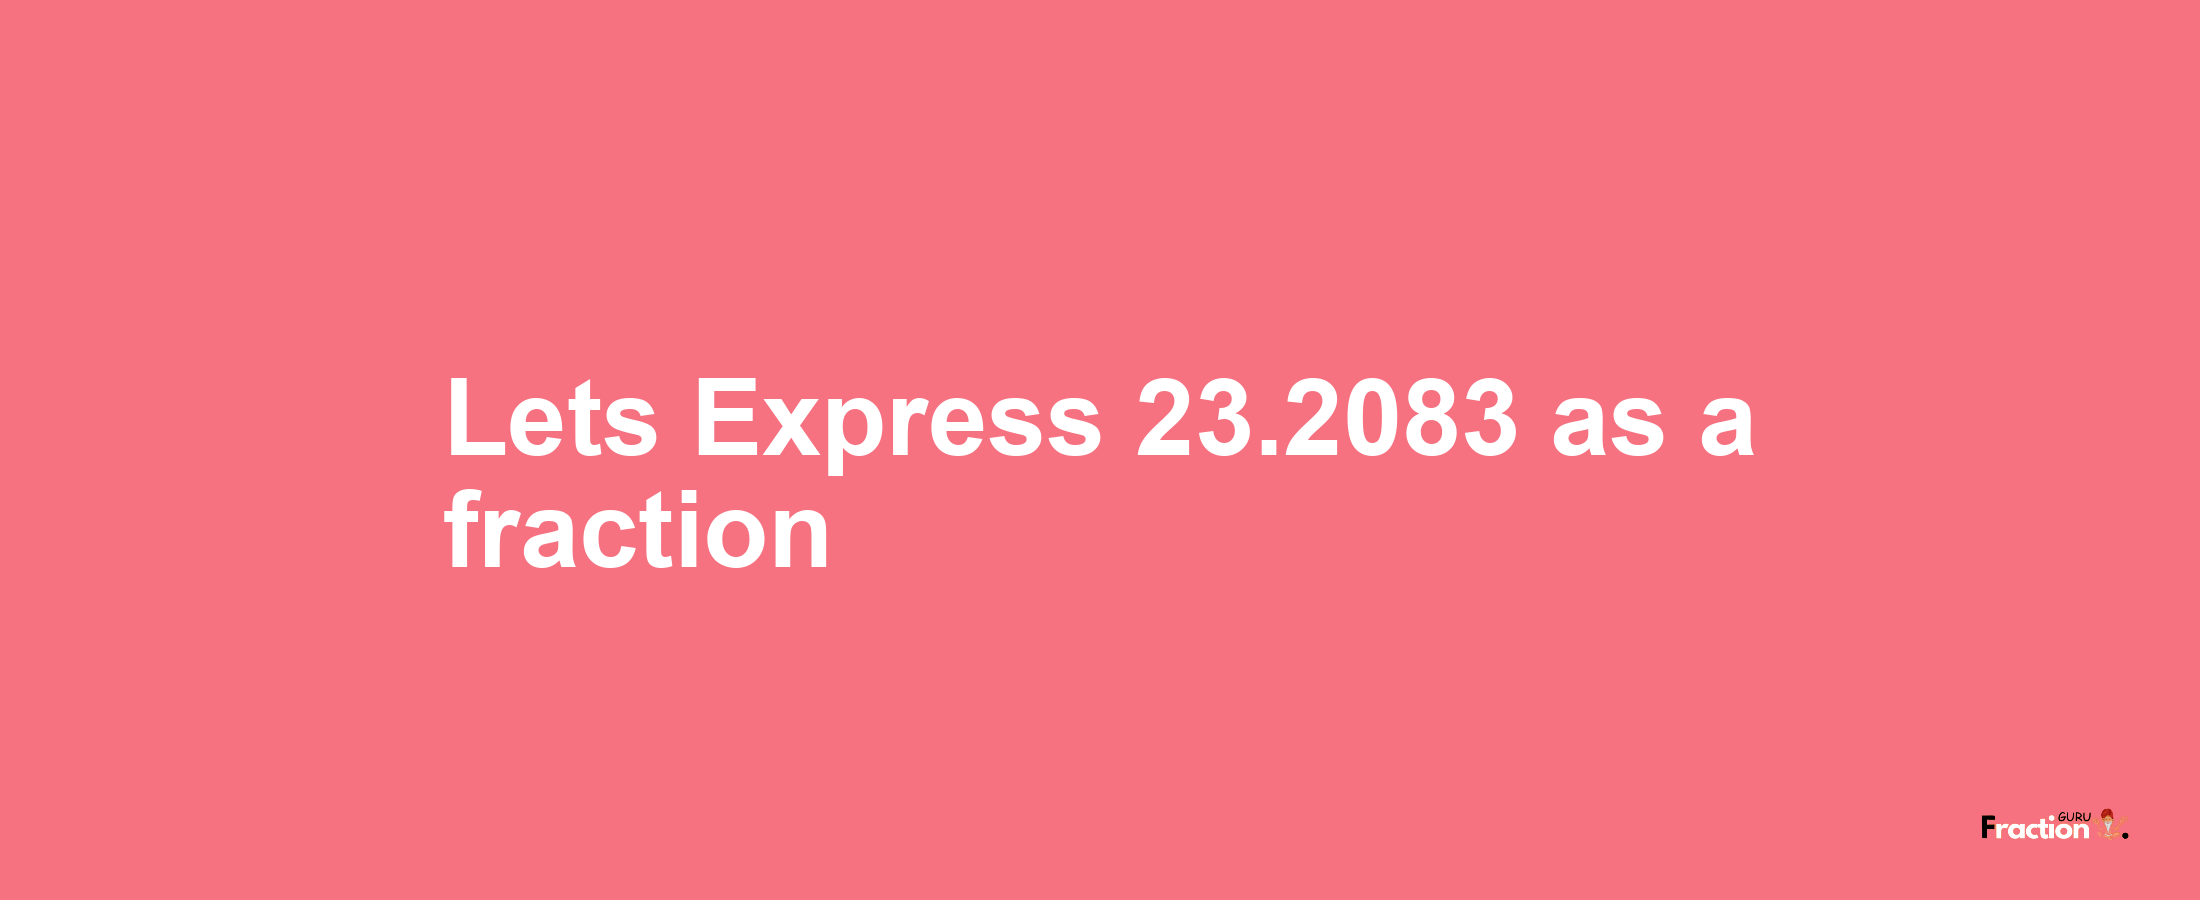 Lets Express 23.2083 as afraction